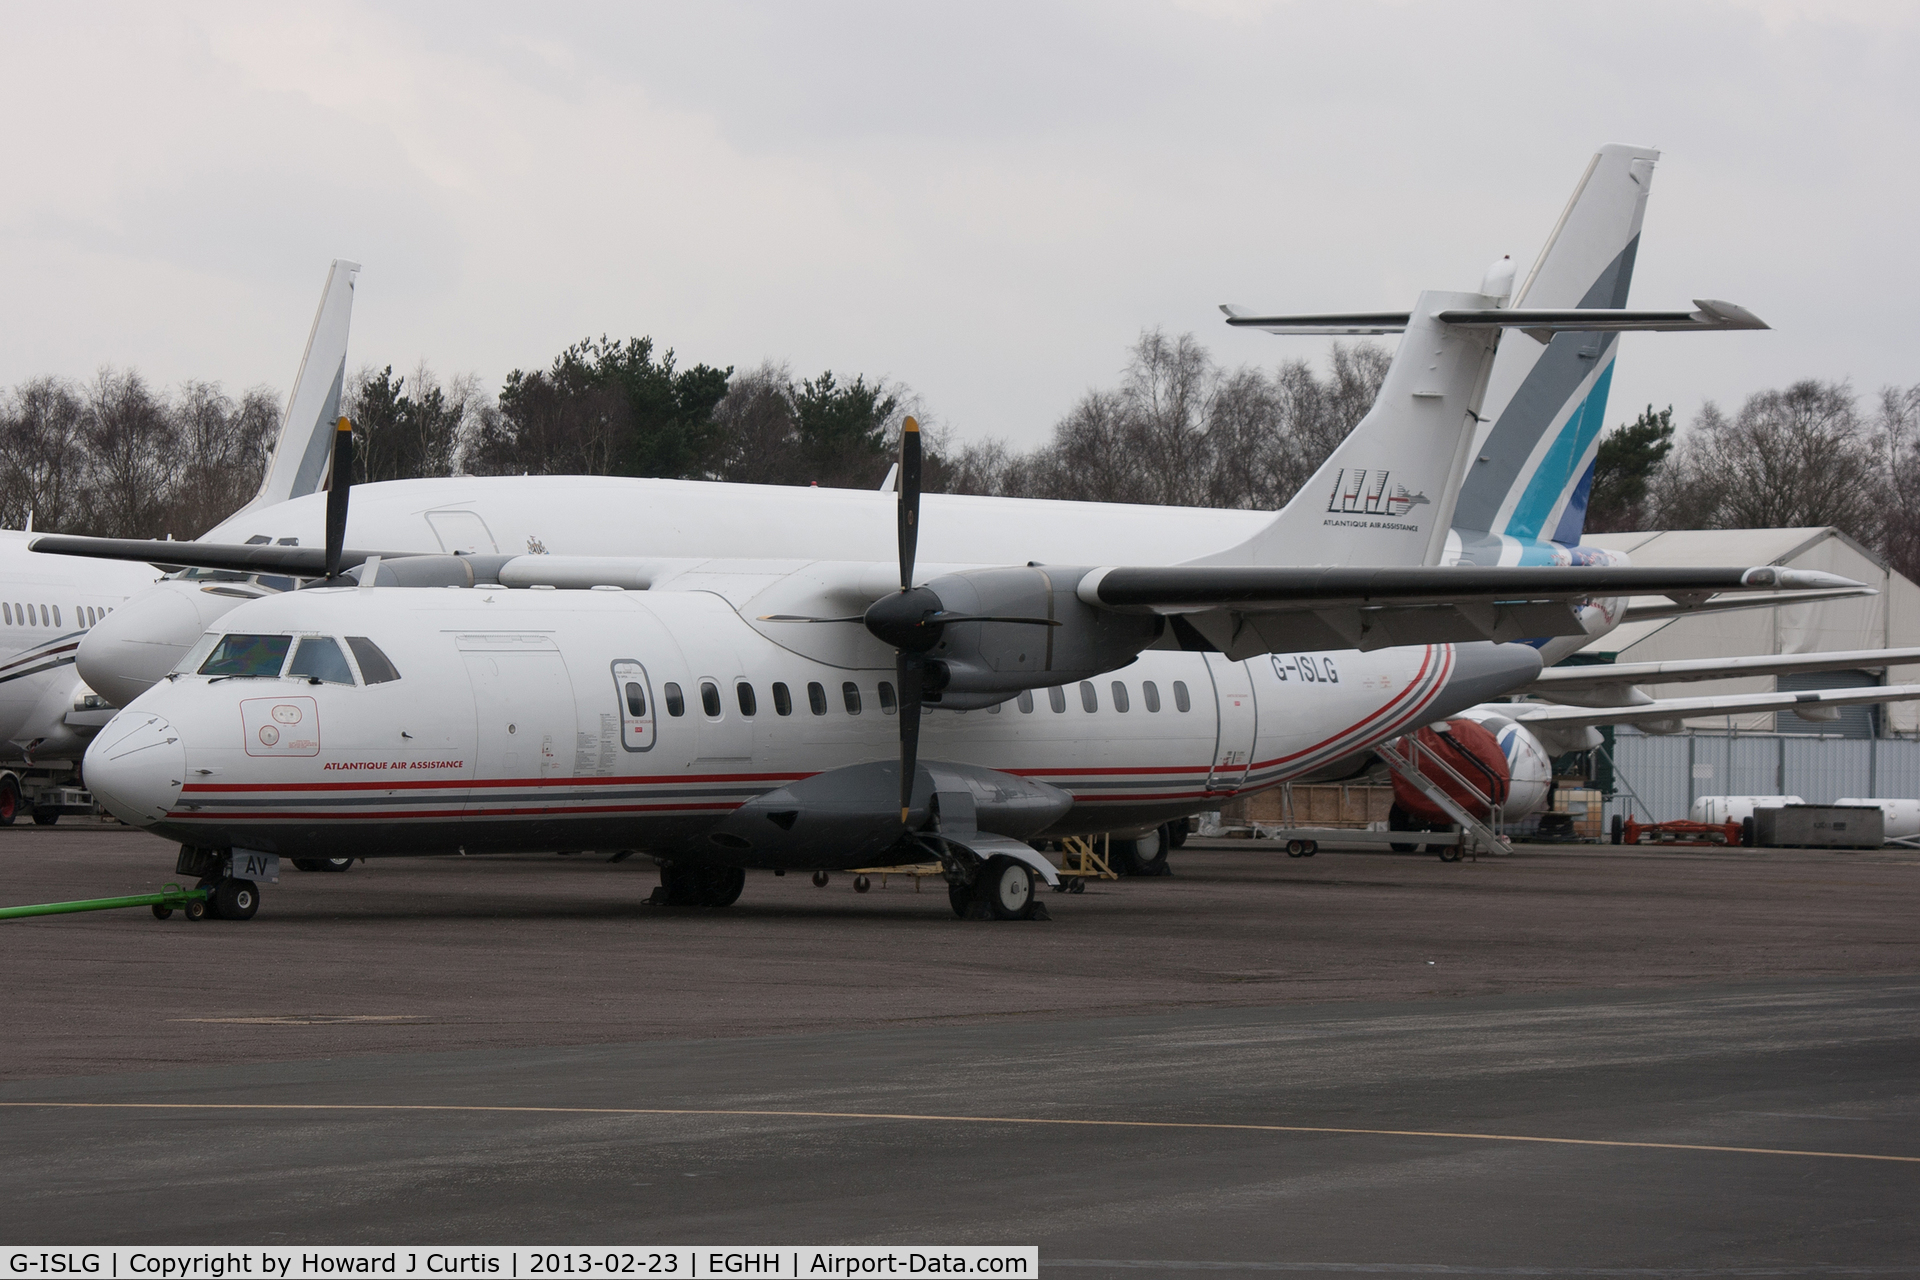 G-ISLG, 1986 ATR 42-320 C/N 019, Former Atlantique Air Assistance machine, for repainting in Blue Islands colours.